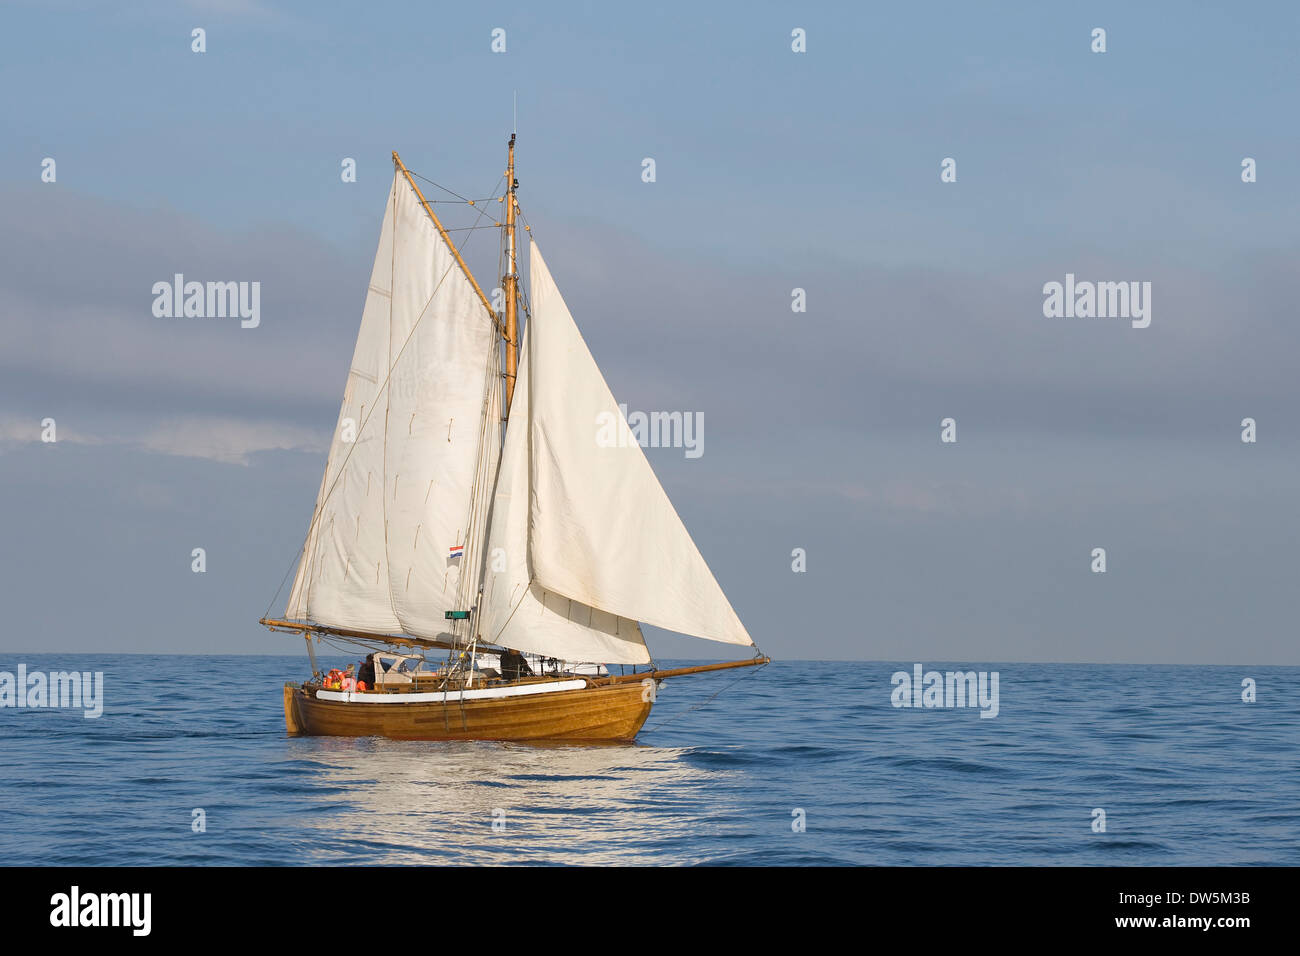 Tender with white sails in the calm sea Stock Photo